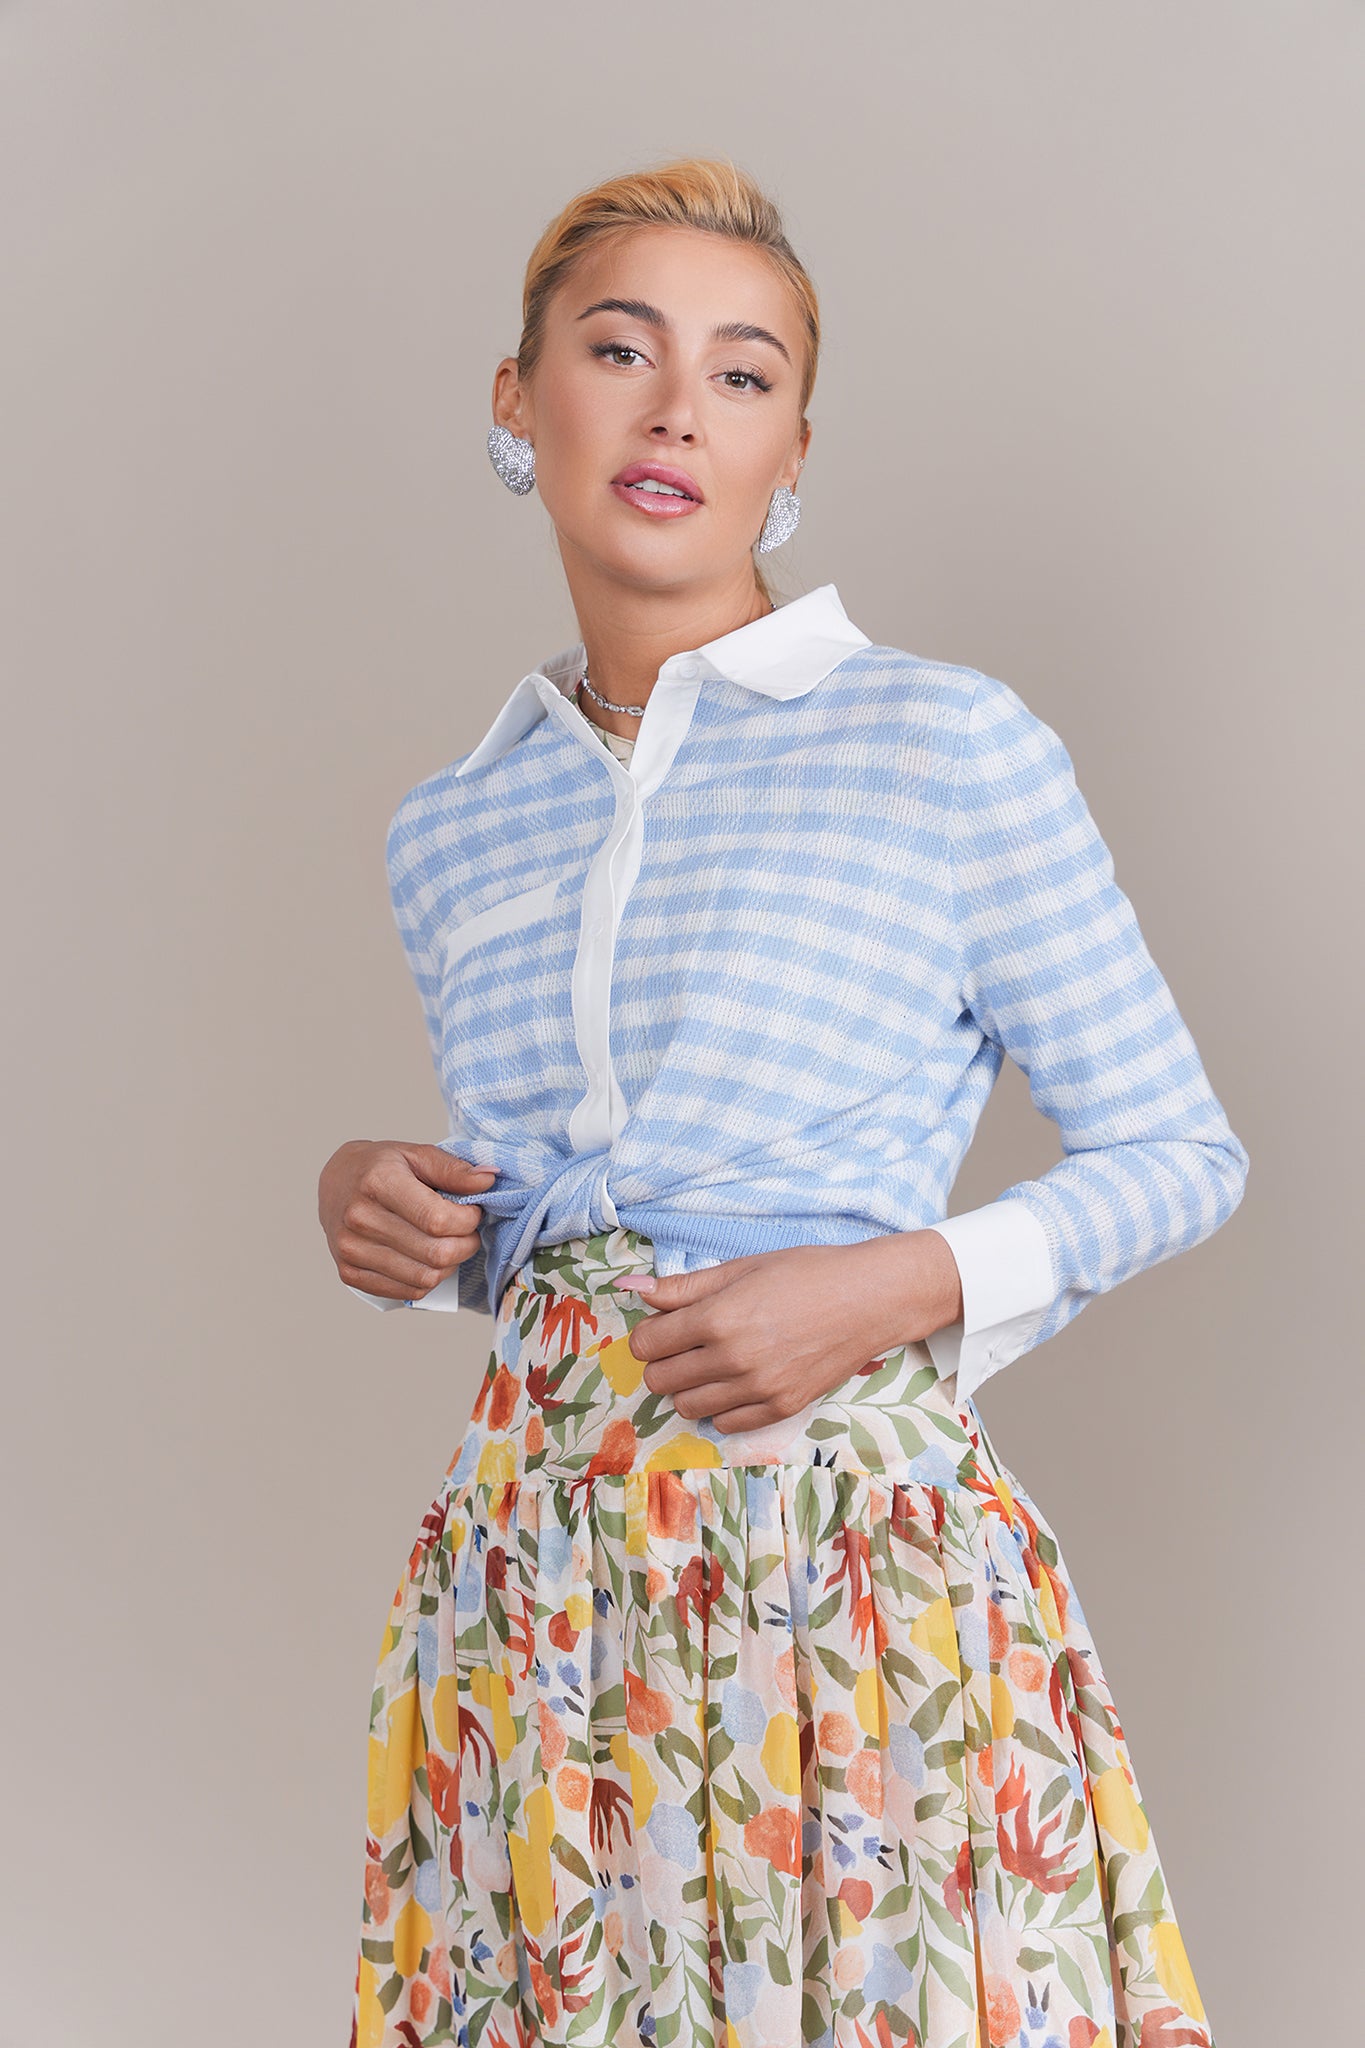 Riviera Blouse in Blue/White